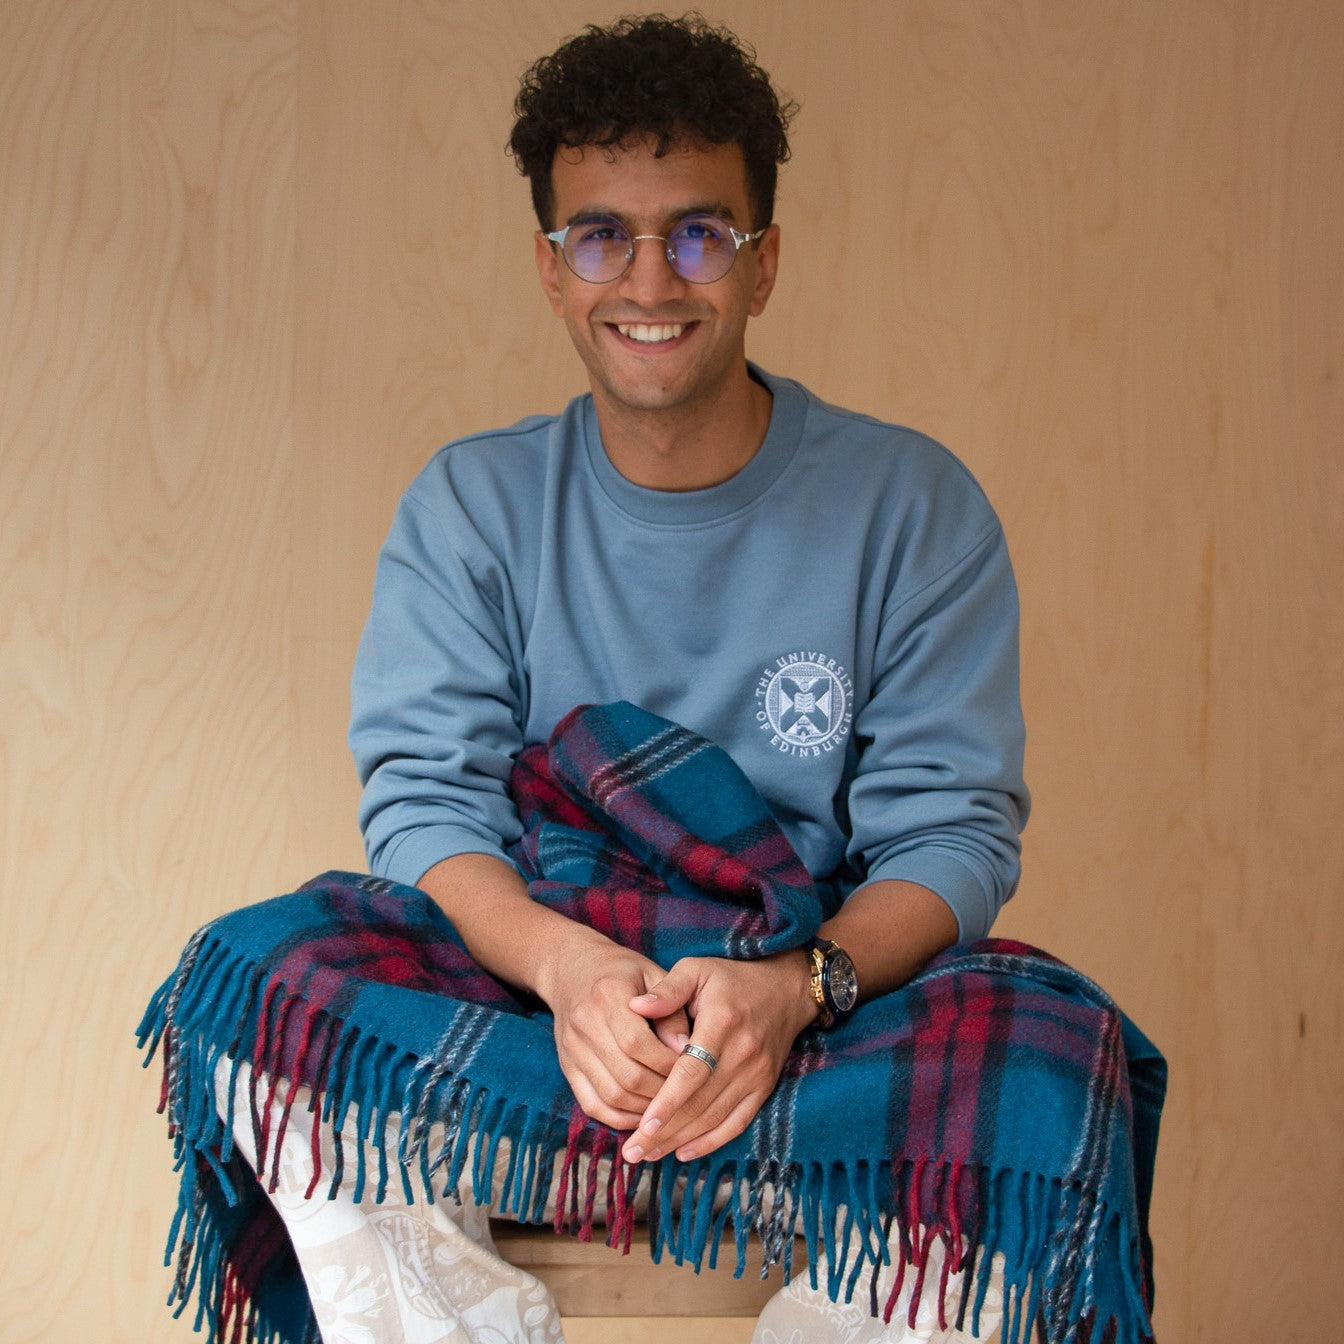 our model wears the stone blue embroidered sweatshirt, holding our university tartan blanket 